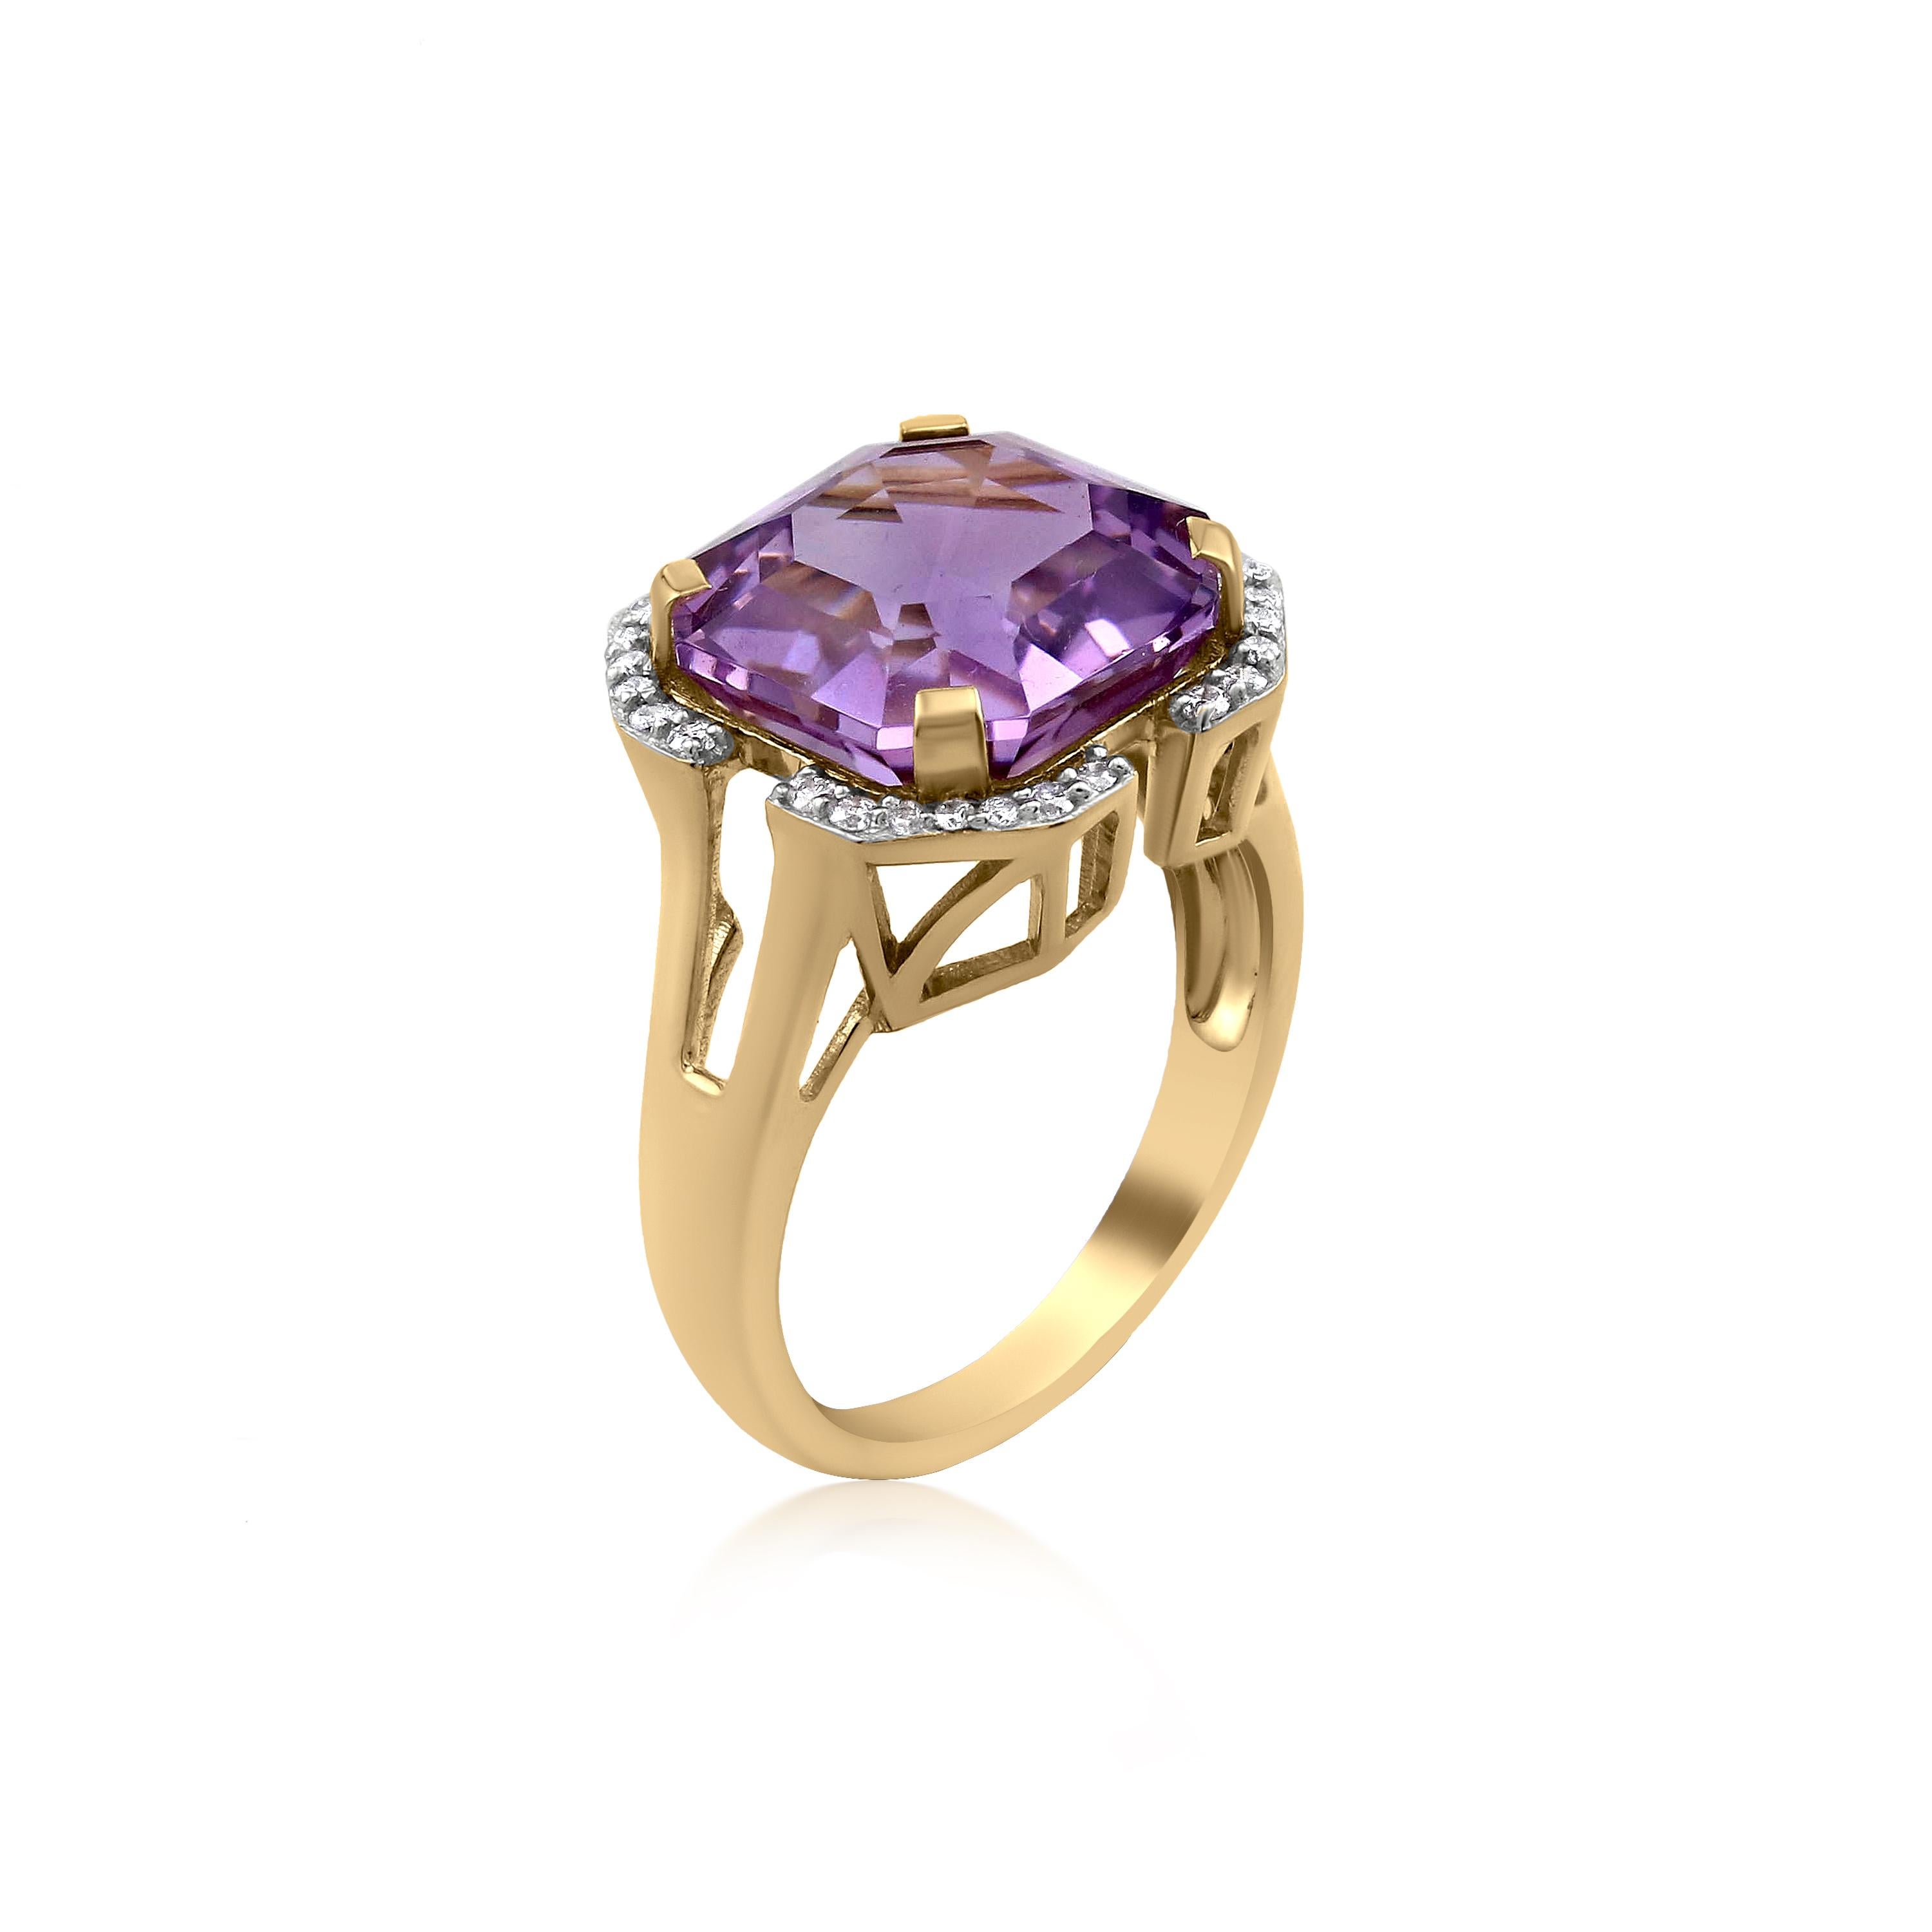 Gemistry 7.6 Carat Asscher Cut Amethyst Solitaire Ring with Diamond in 14K Gold 2